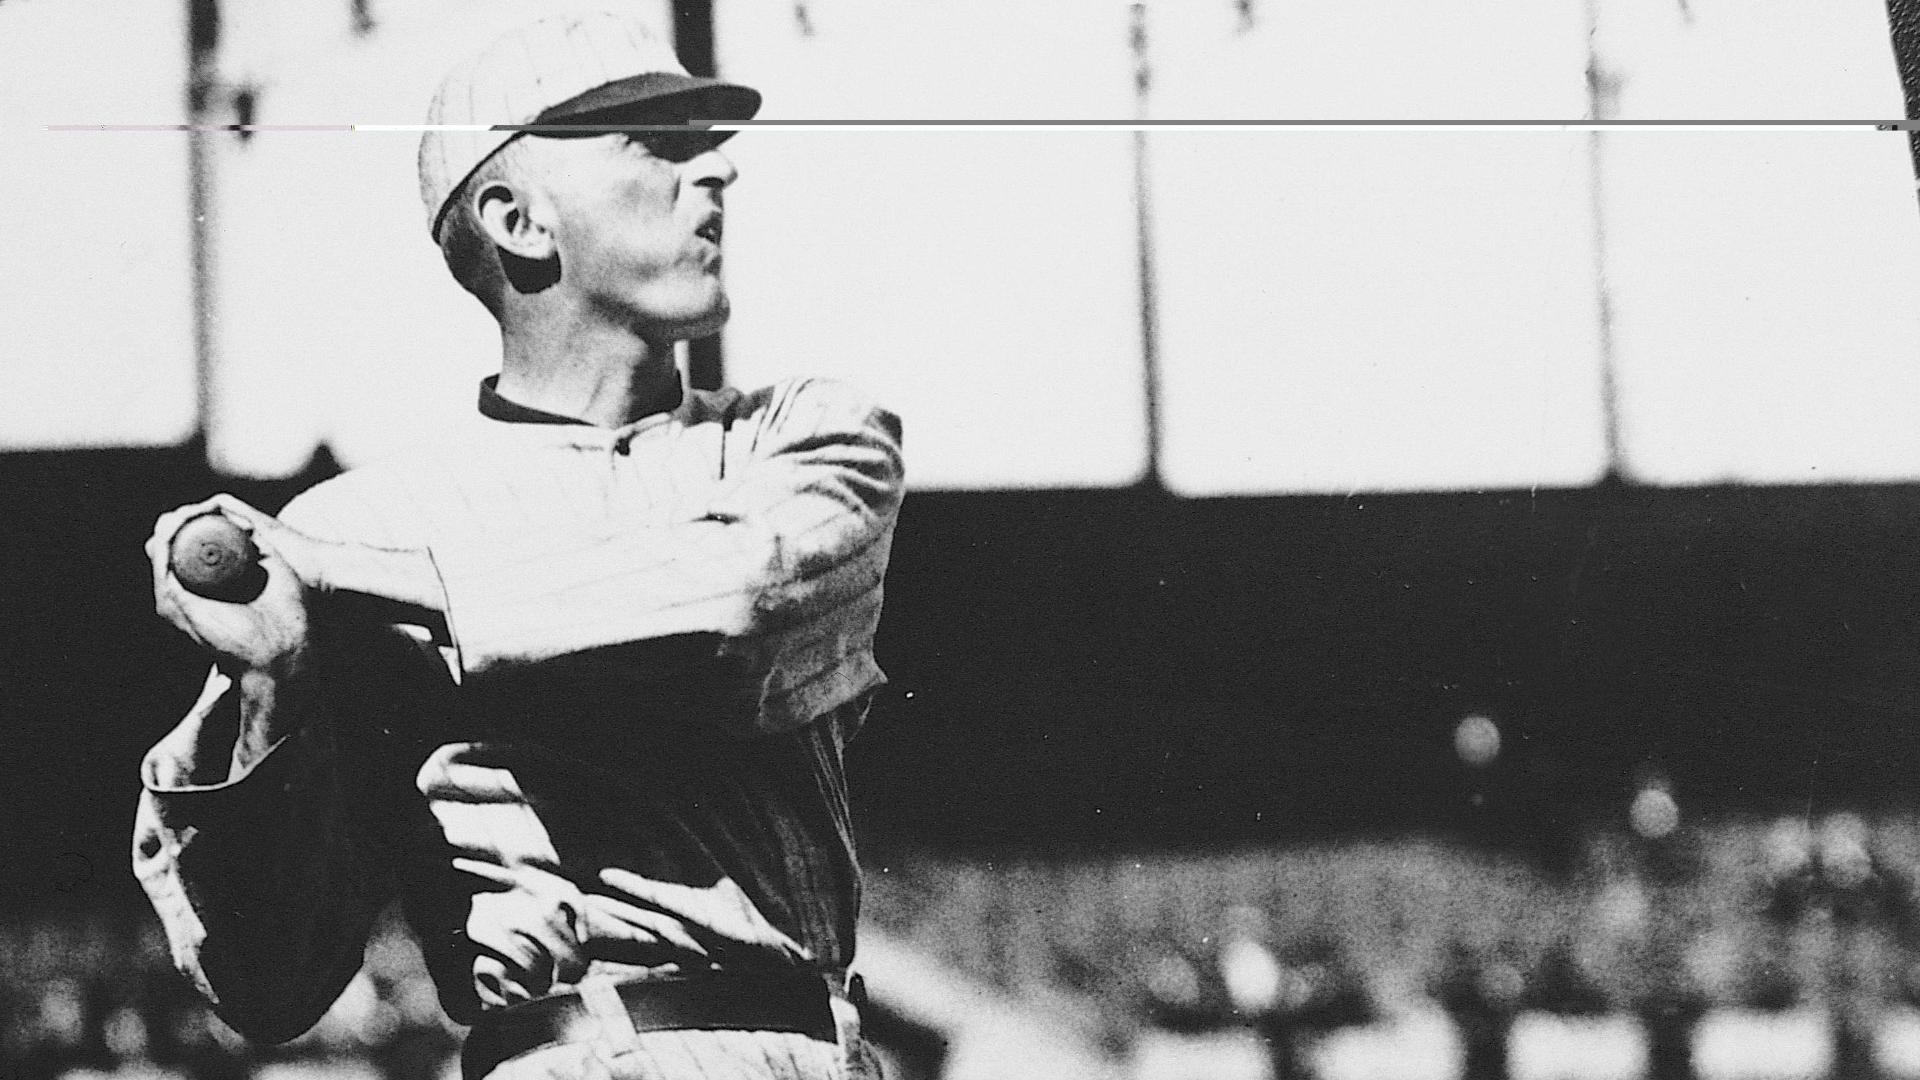 what happened to shoeless joe jackson after the 1919 world series scandal